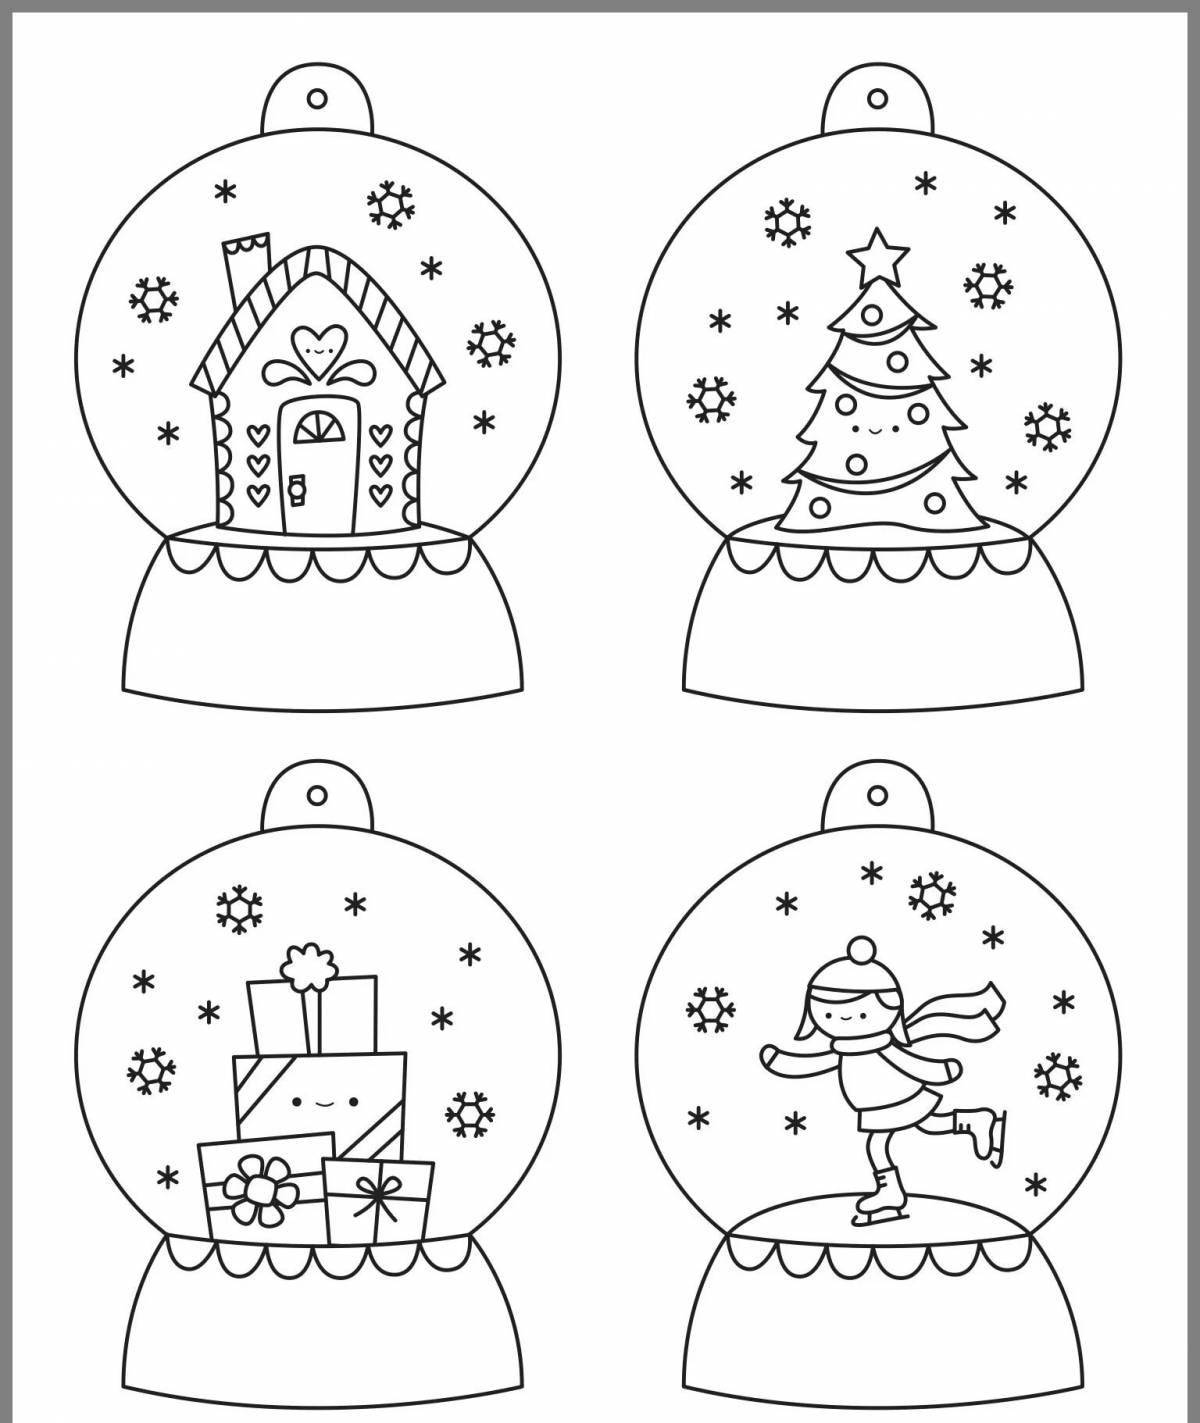 Colorful coloring crafts for the new year